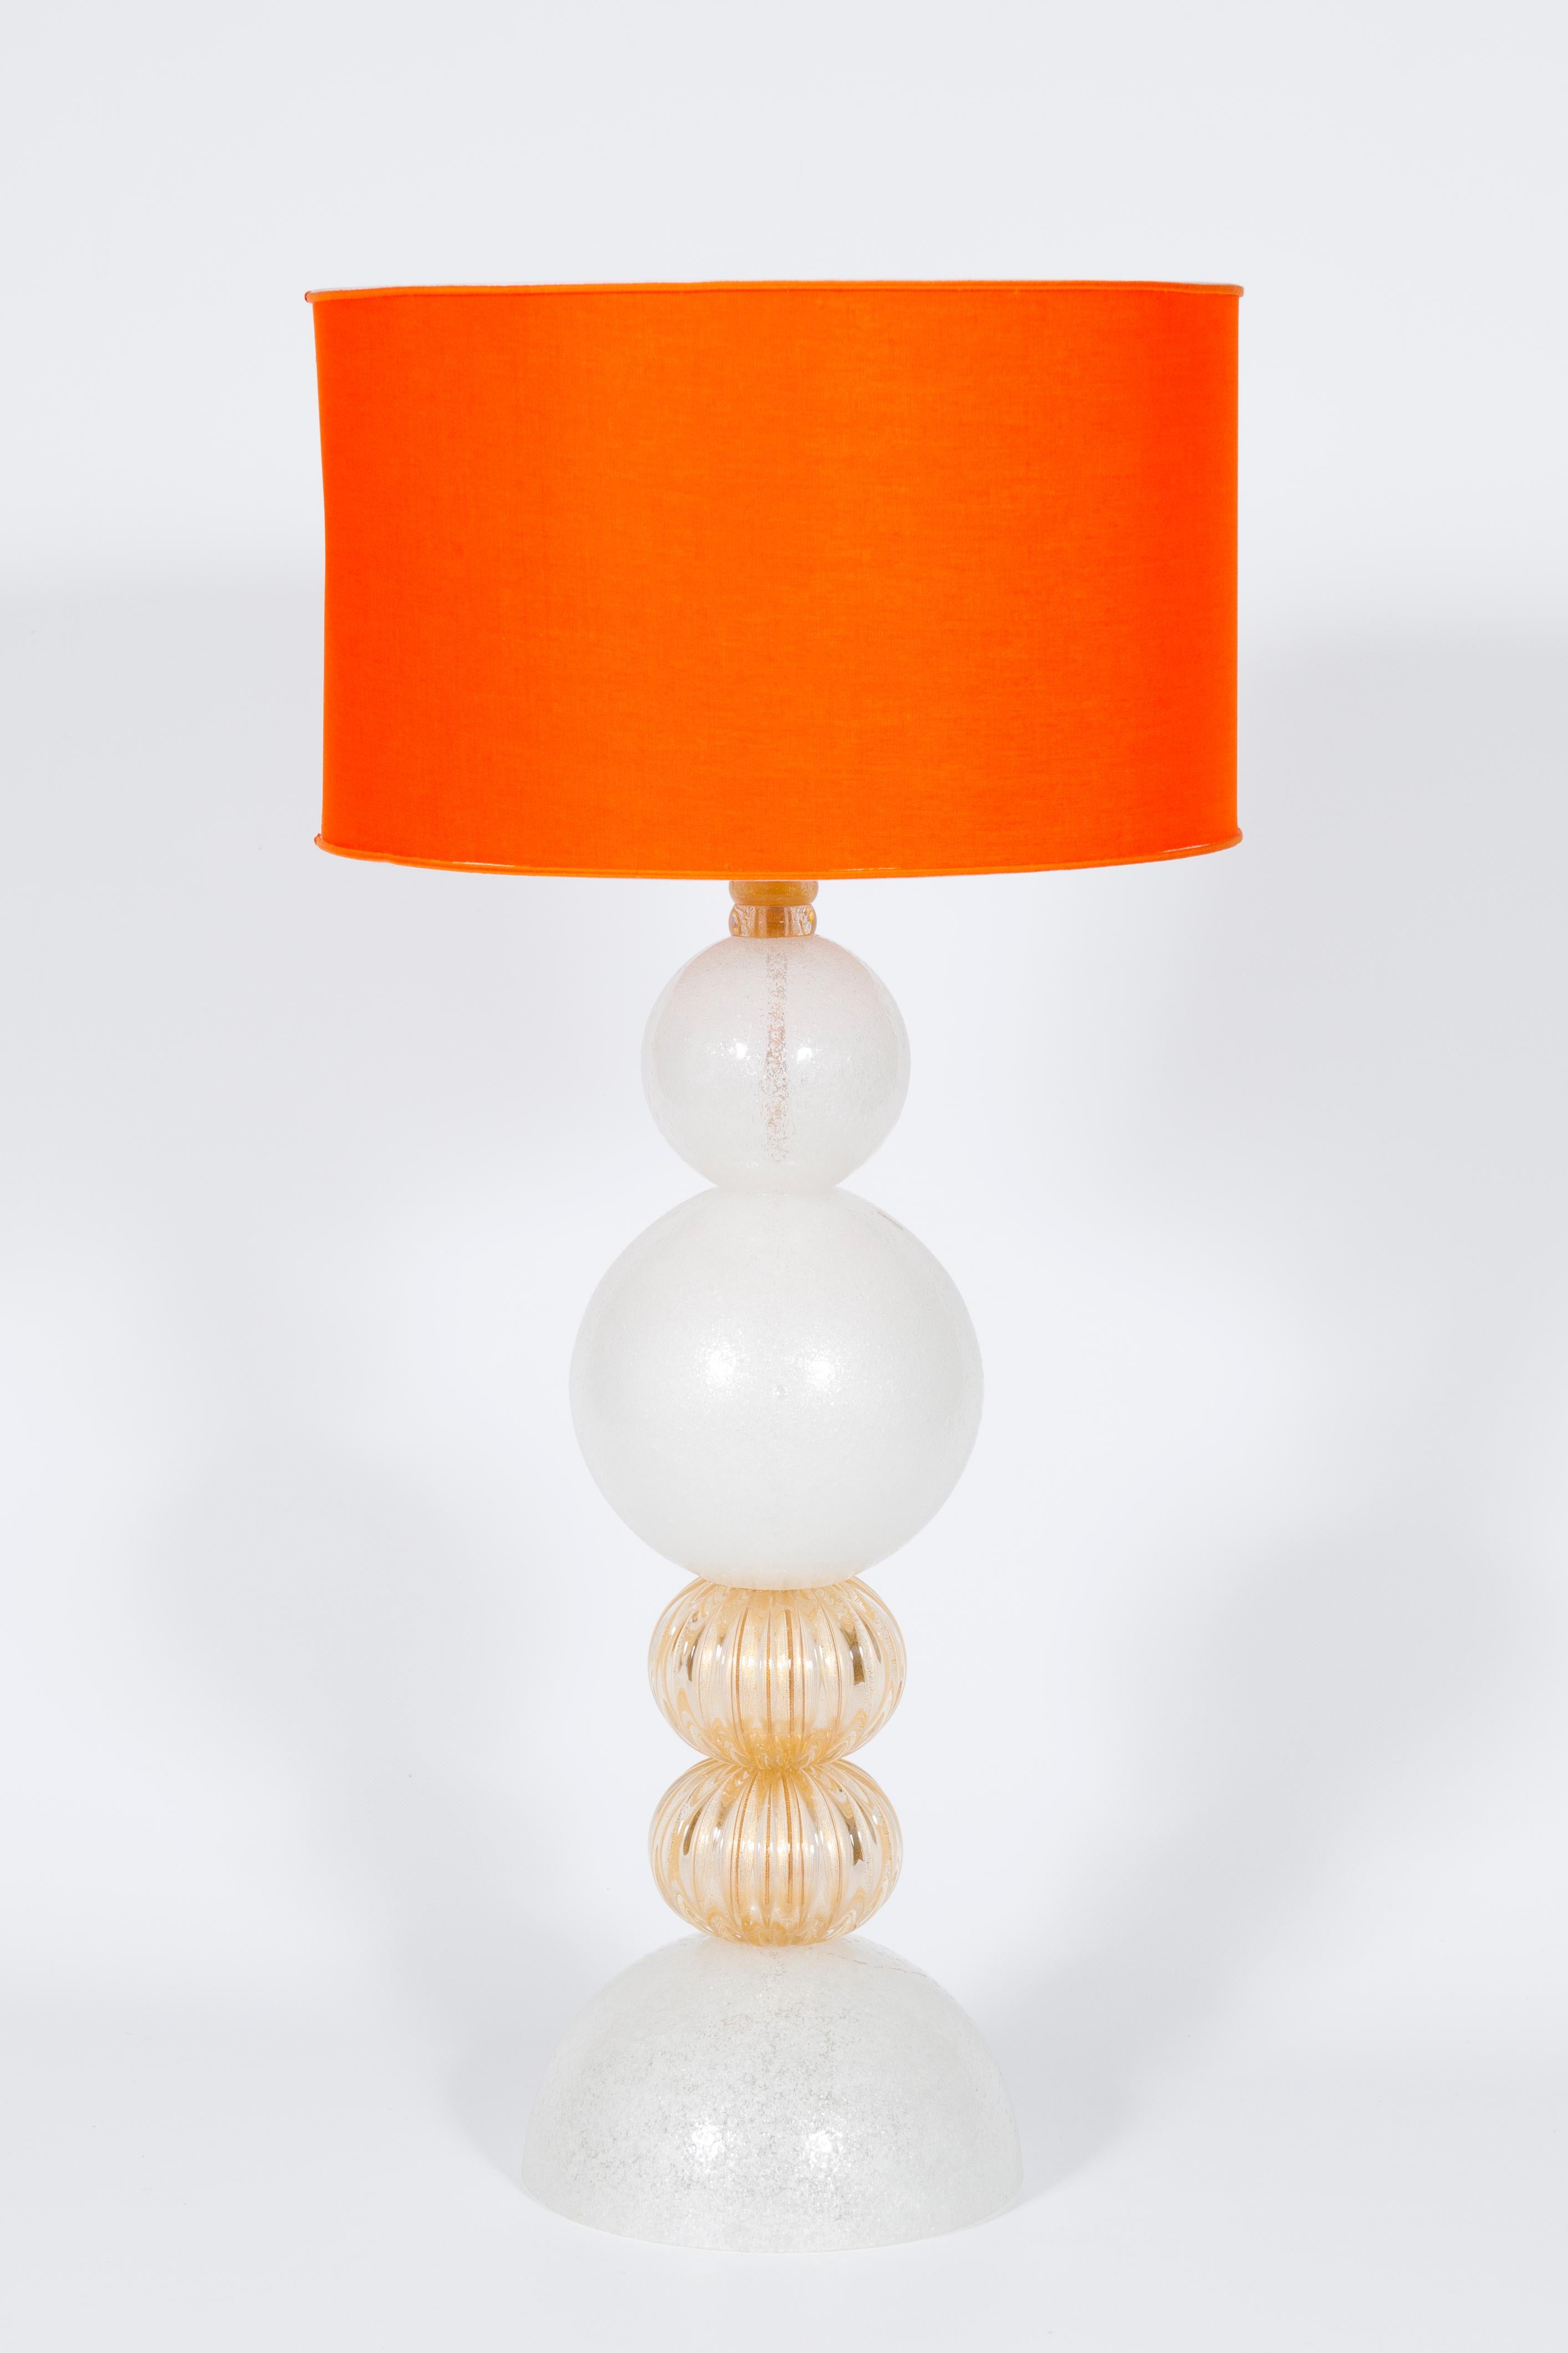 Pair of Pulegoso Murano Glass Table Lamps with 24-carat gold, 1990s, Italy.
This refined pair of Italian table lamps is a unique and precious piece of art. 
At its base, a white semi-spheric glass element sustains the lamp stem, made of two